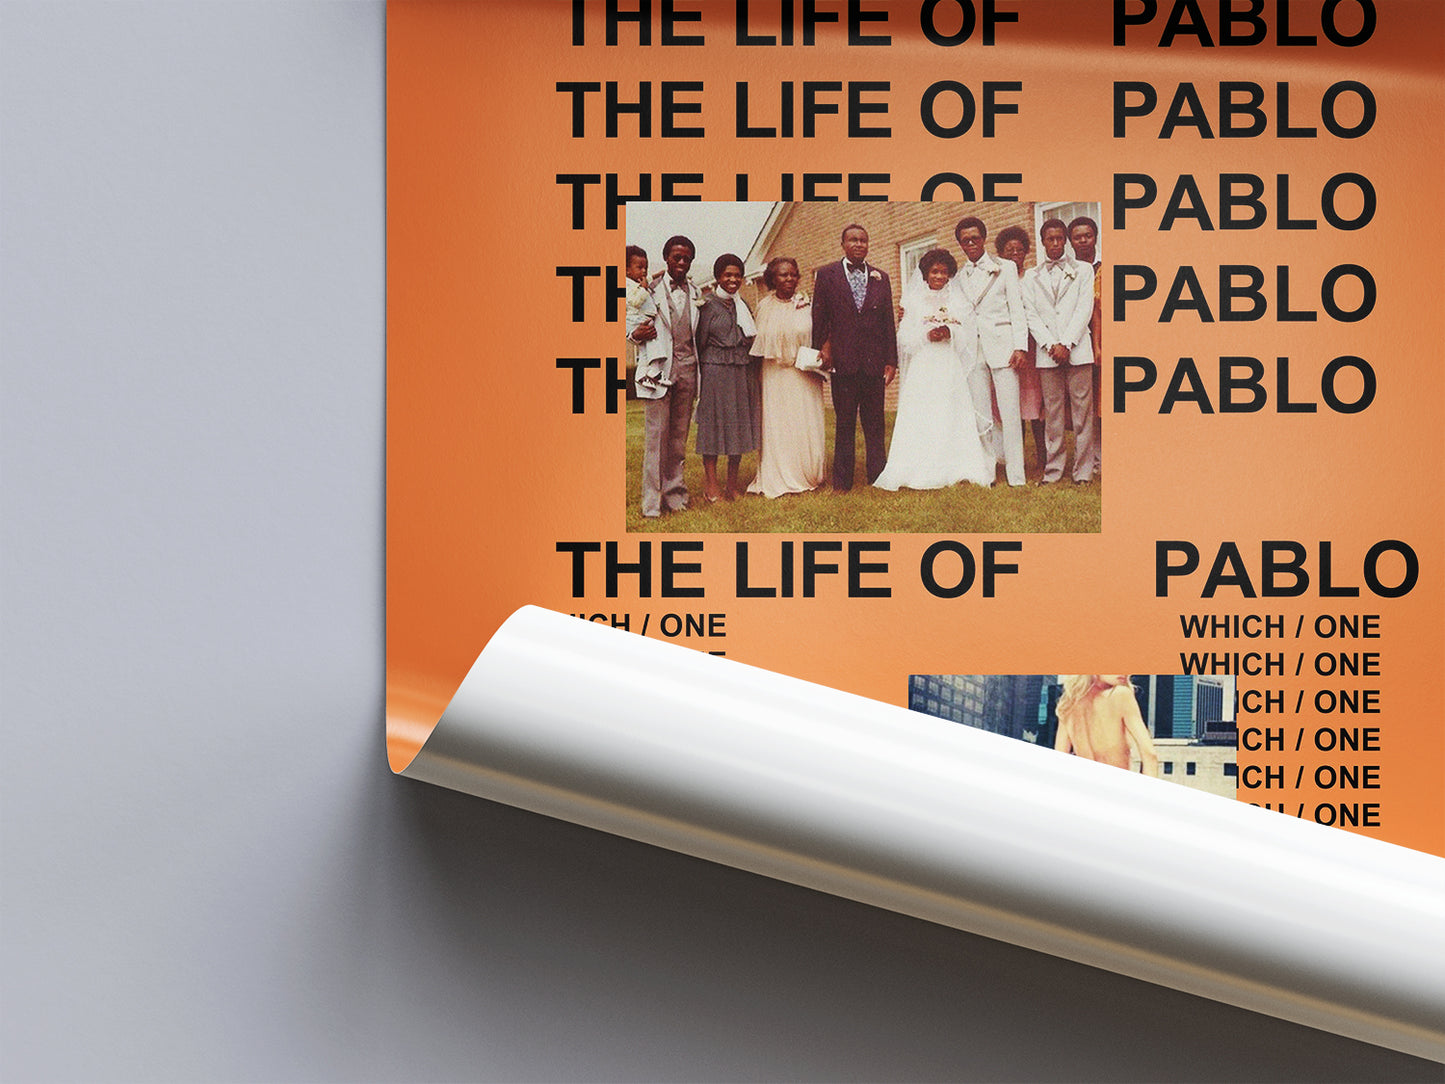 Kanye West 'The Life of Pablo' Poster